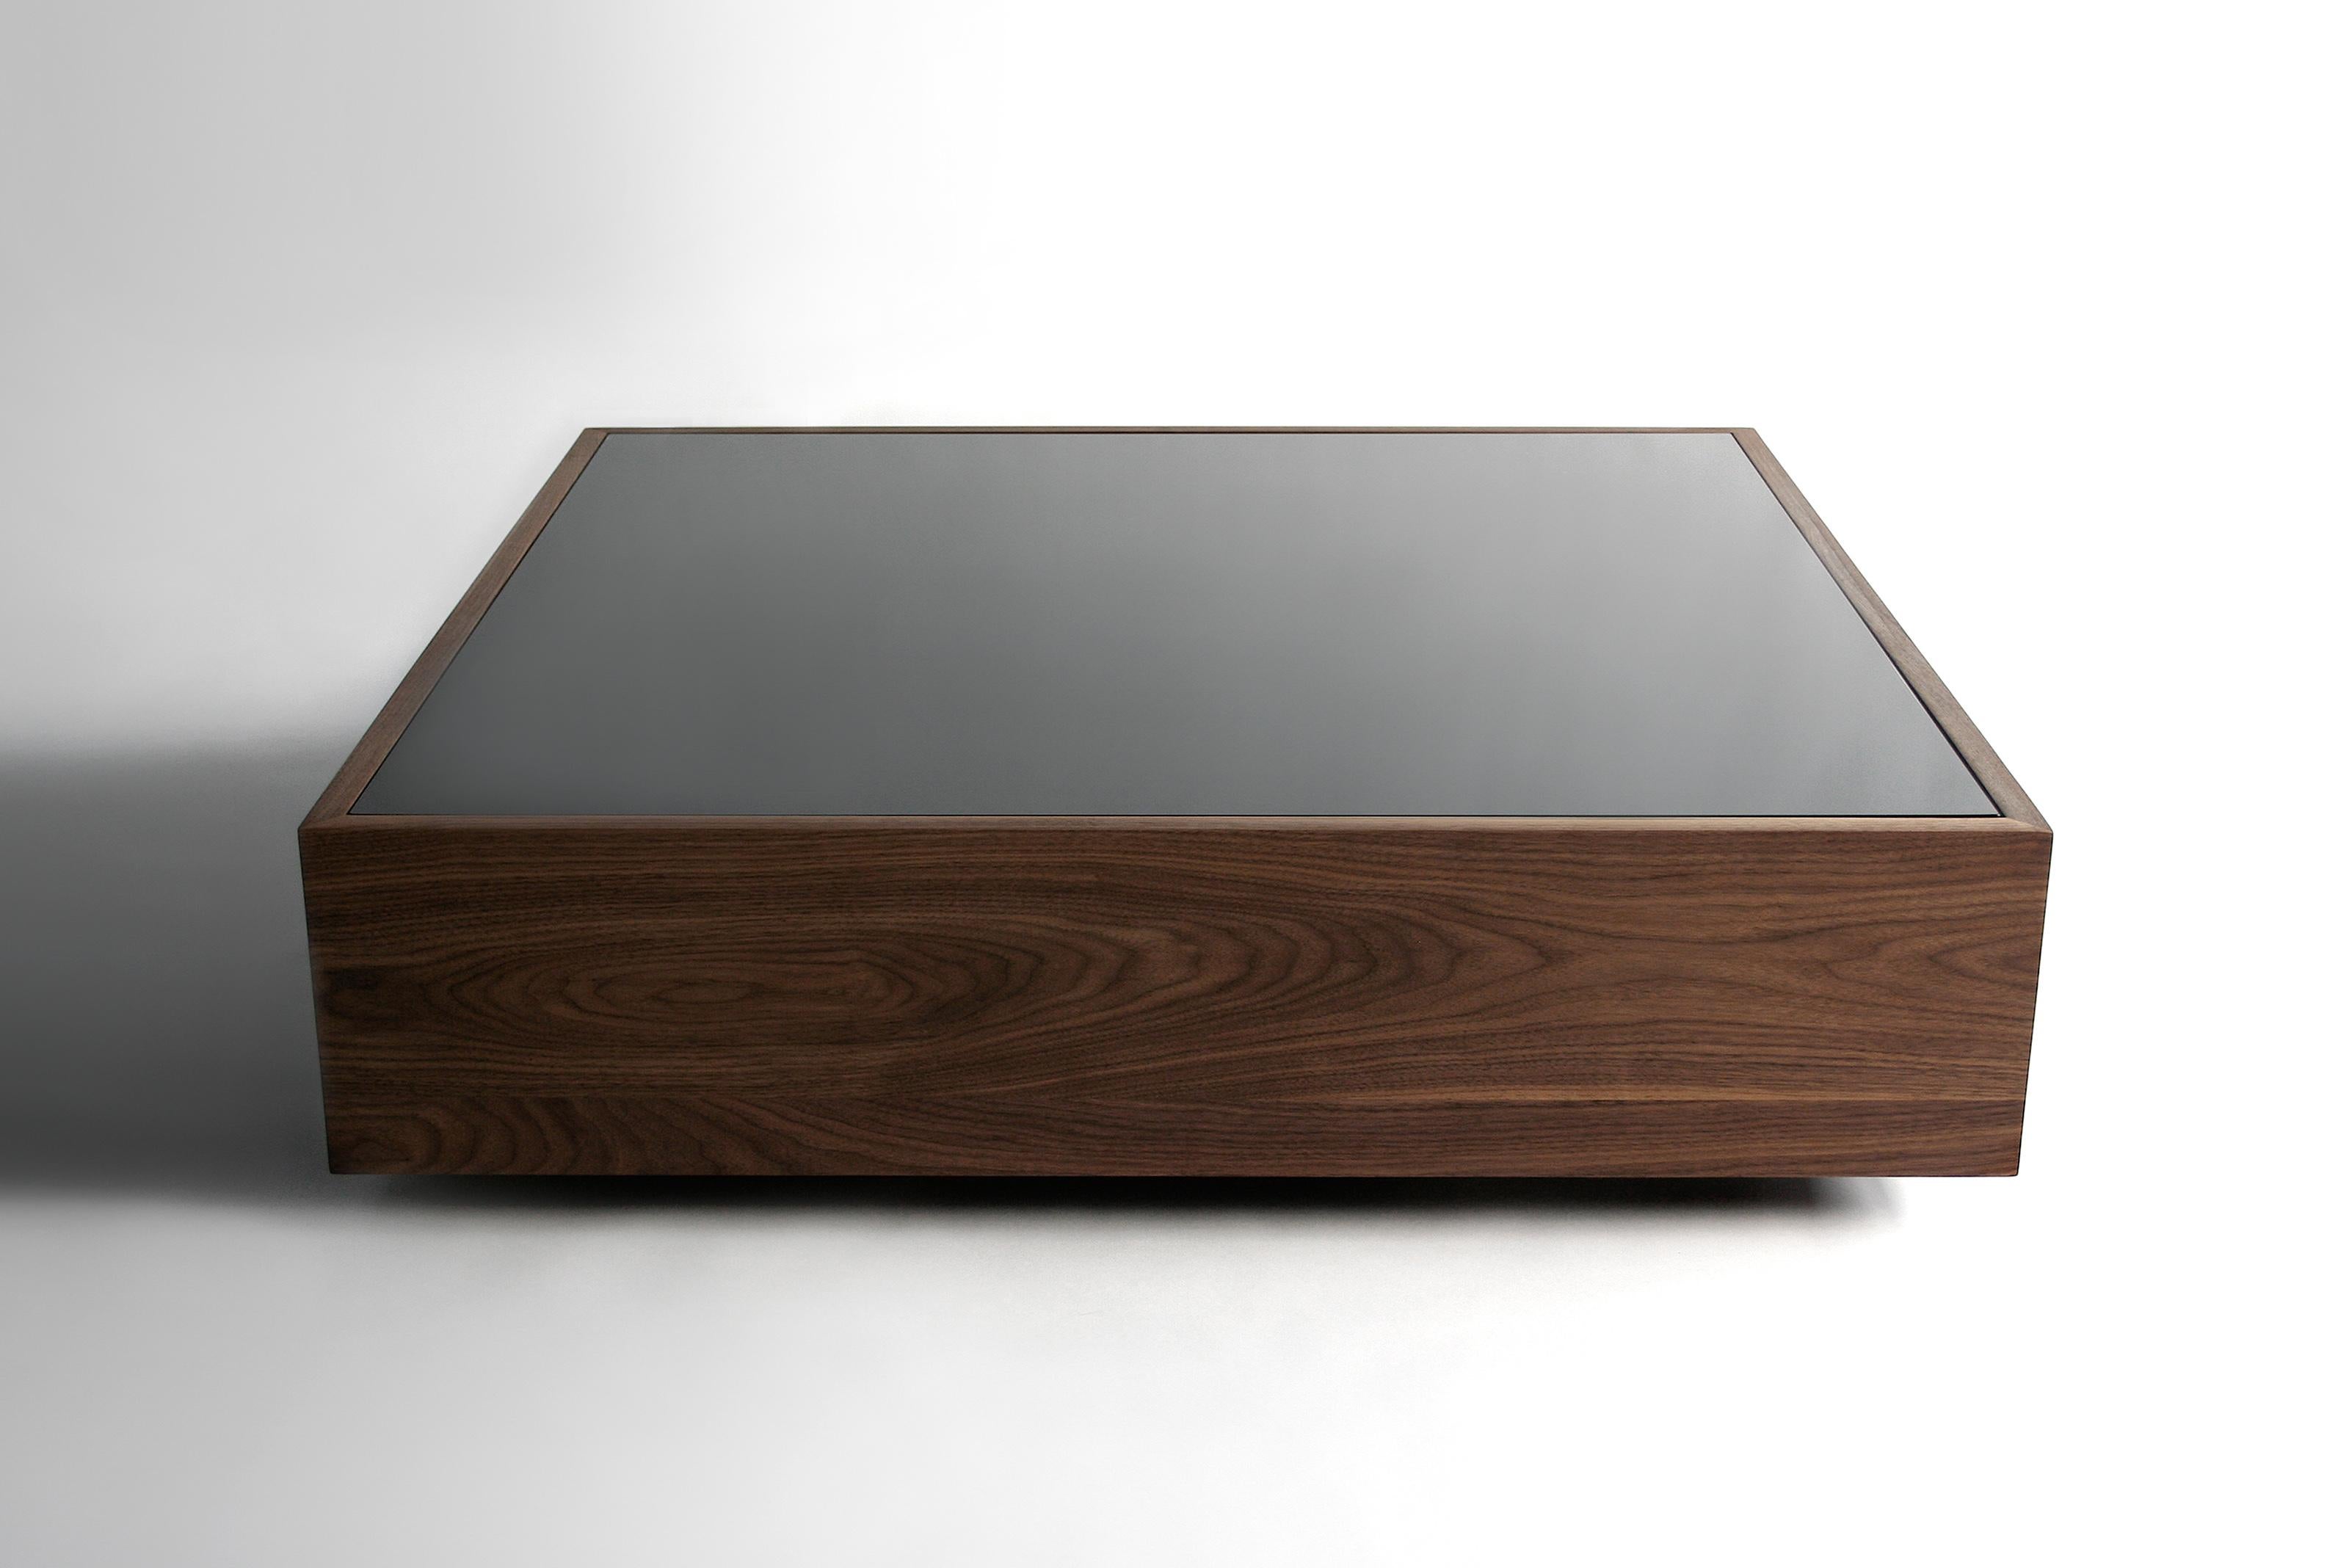 Narcissist Version C Coffee Table by Phase Design
Dimensions: D 106.7 x W 106.7 x H 30.5 cm. 
Materials: Walnut. 

Solid hardwood shell, available in walnut, white ash, white oak, or ebonized oak with tempered black spandrel glass top. Available in